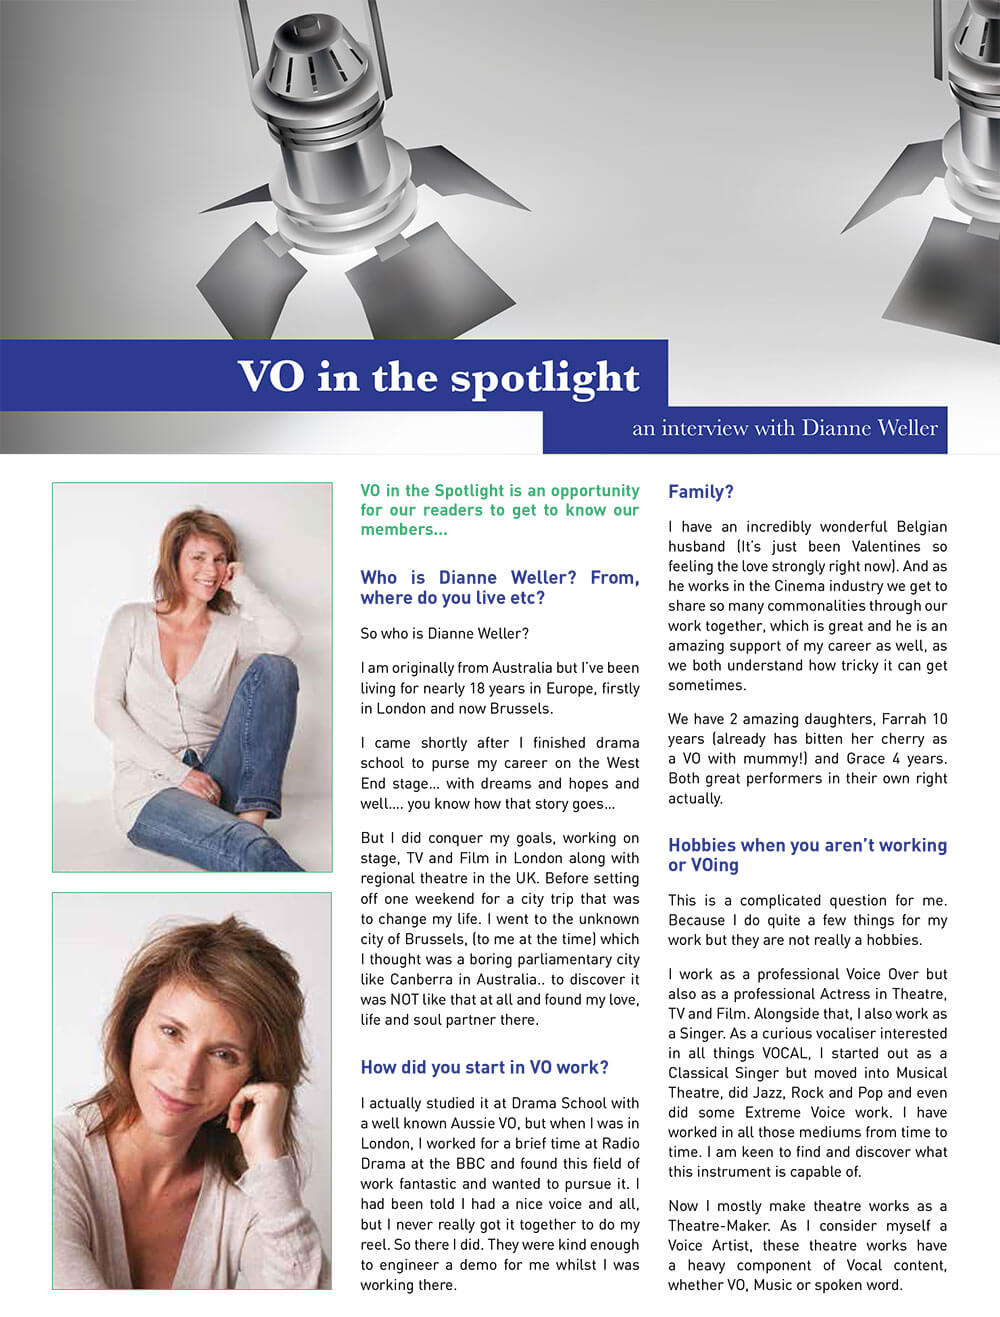 The VoiceeOver Network Dianne Weller